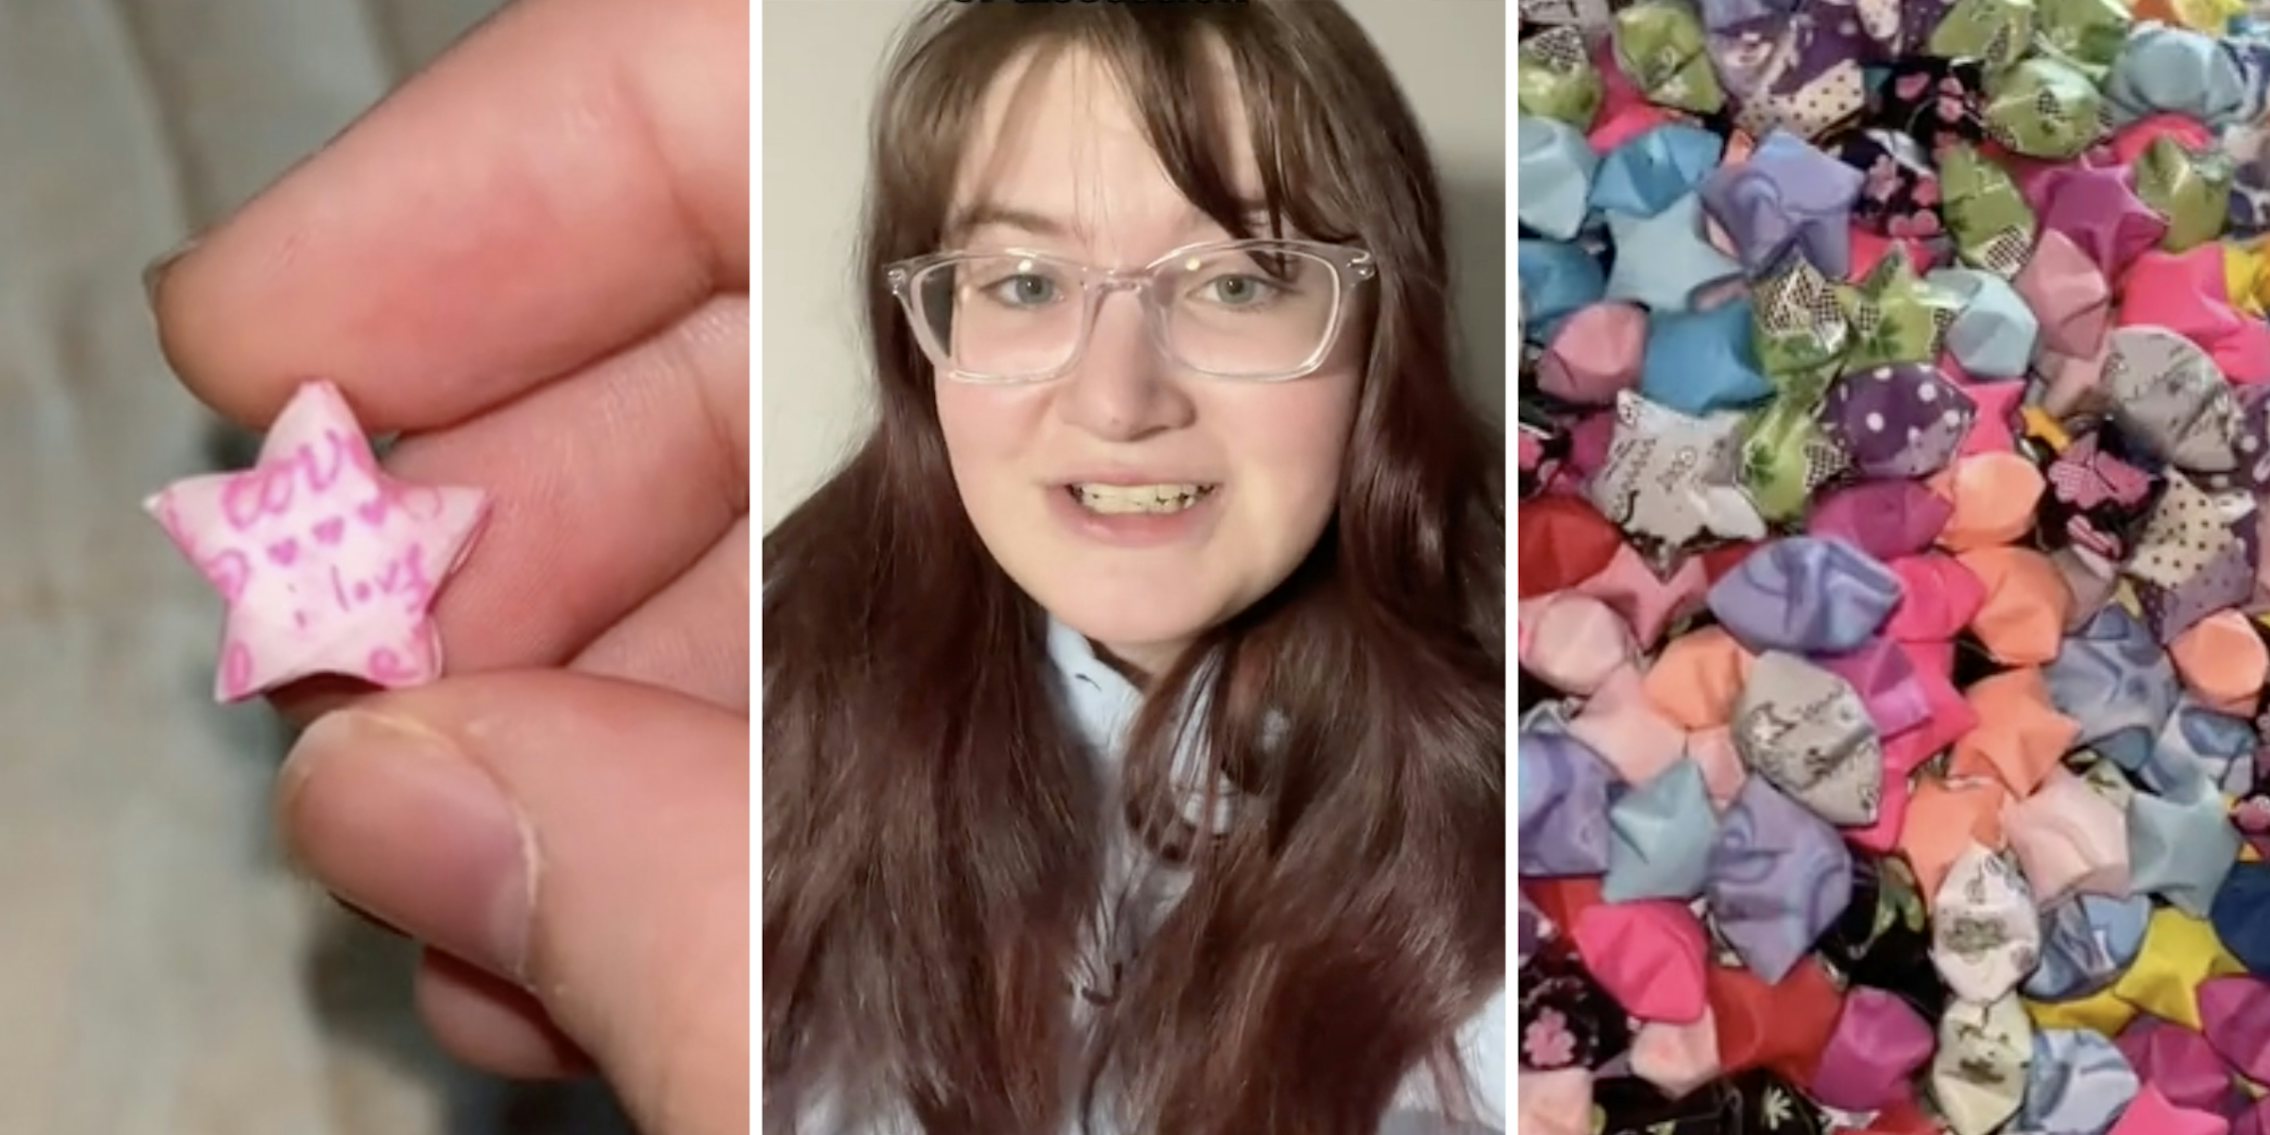 Woman Makes Thousands of Paper Stars During Hospital Stay